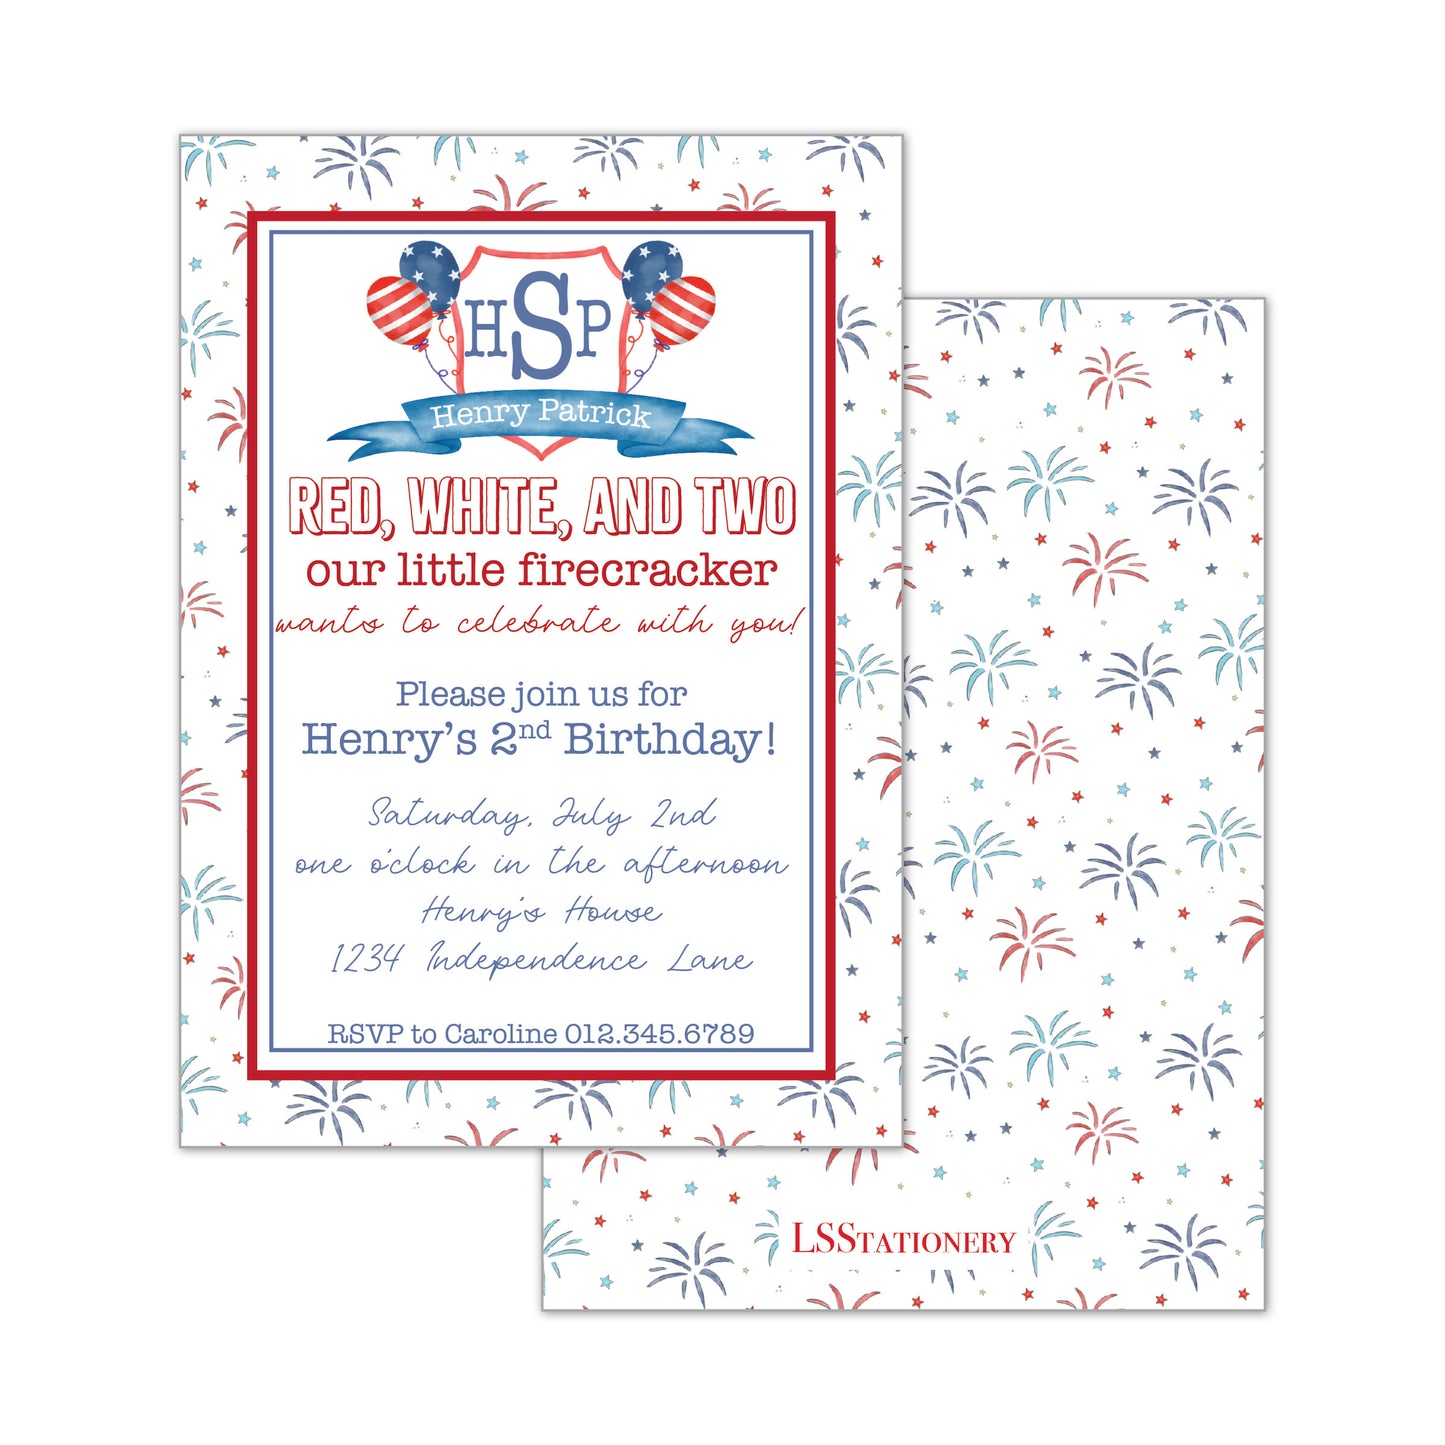 Red, White, and Two Invitation